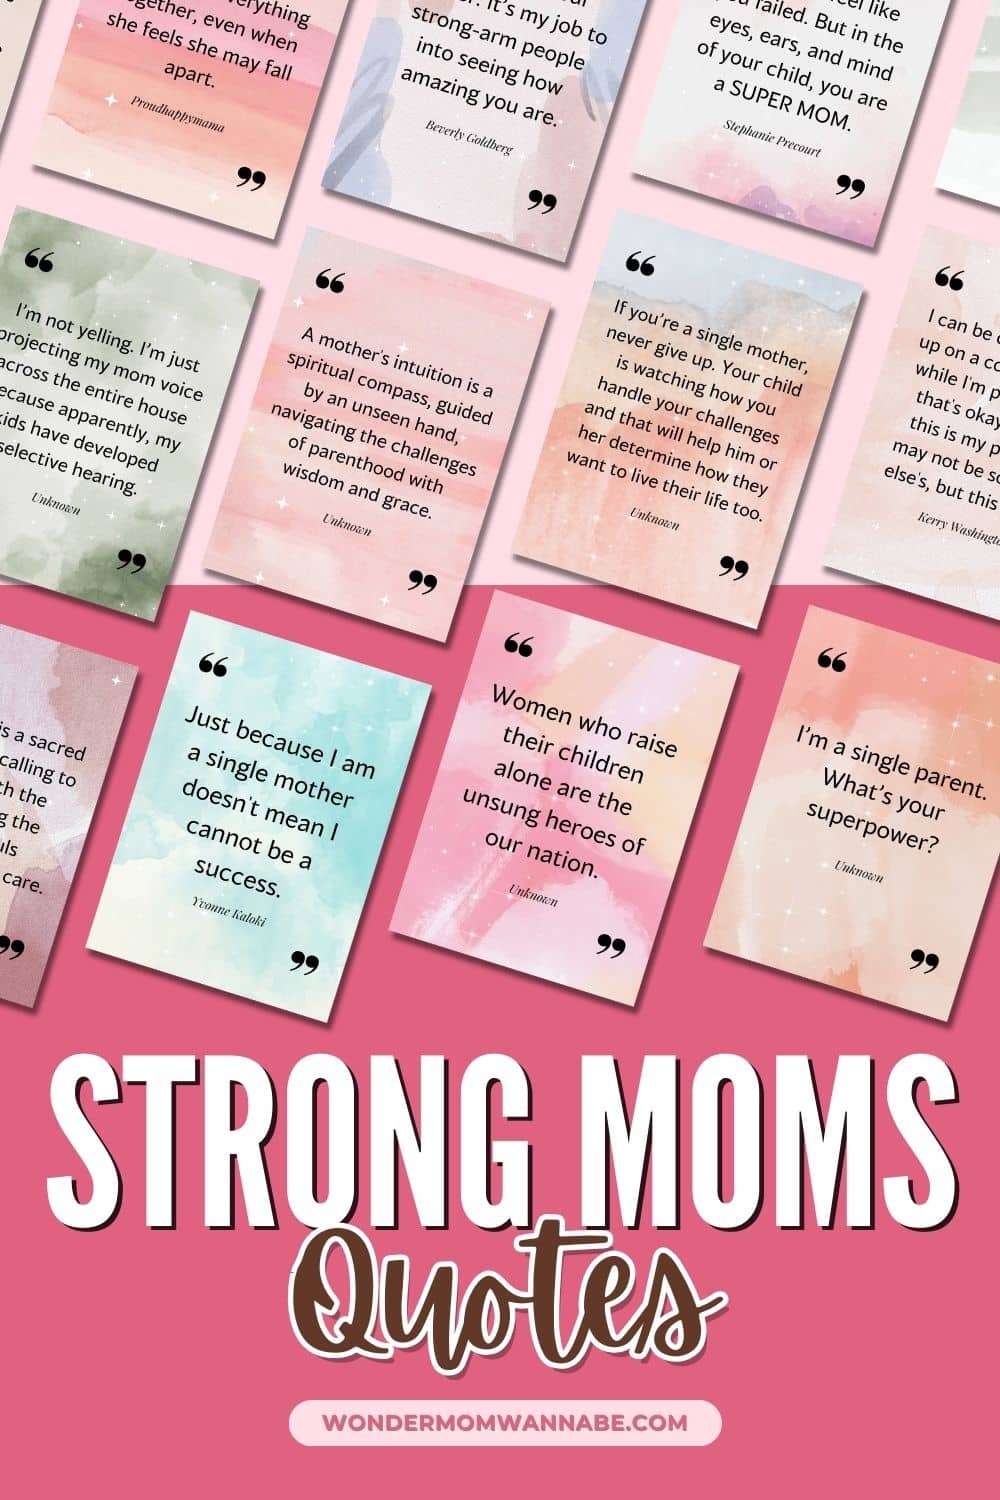 Strong mom quotes printable for all the strong moms out there. These quotes are bound to inspire and empower you, reminding you of your strength and resilience. Hang them up in your home or office as a